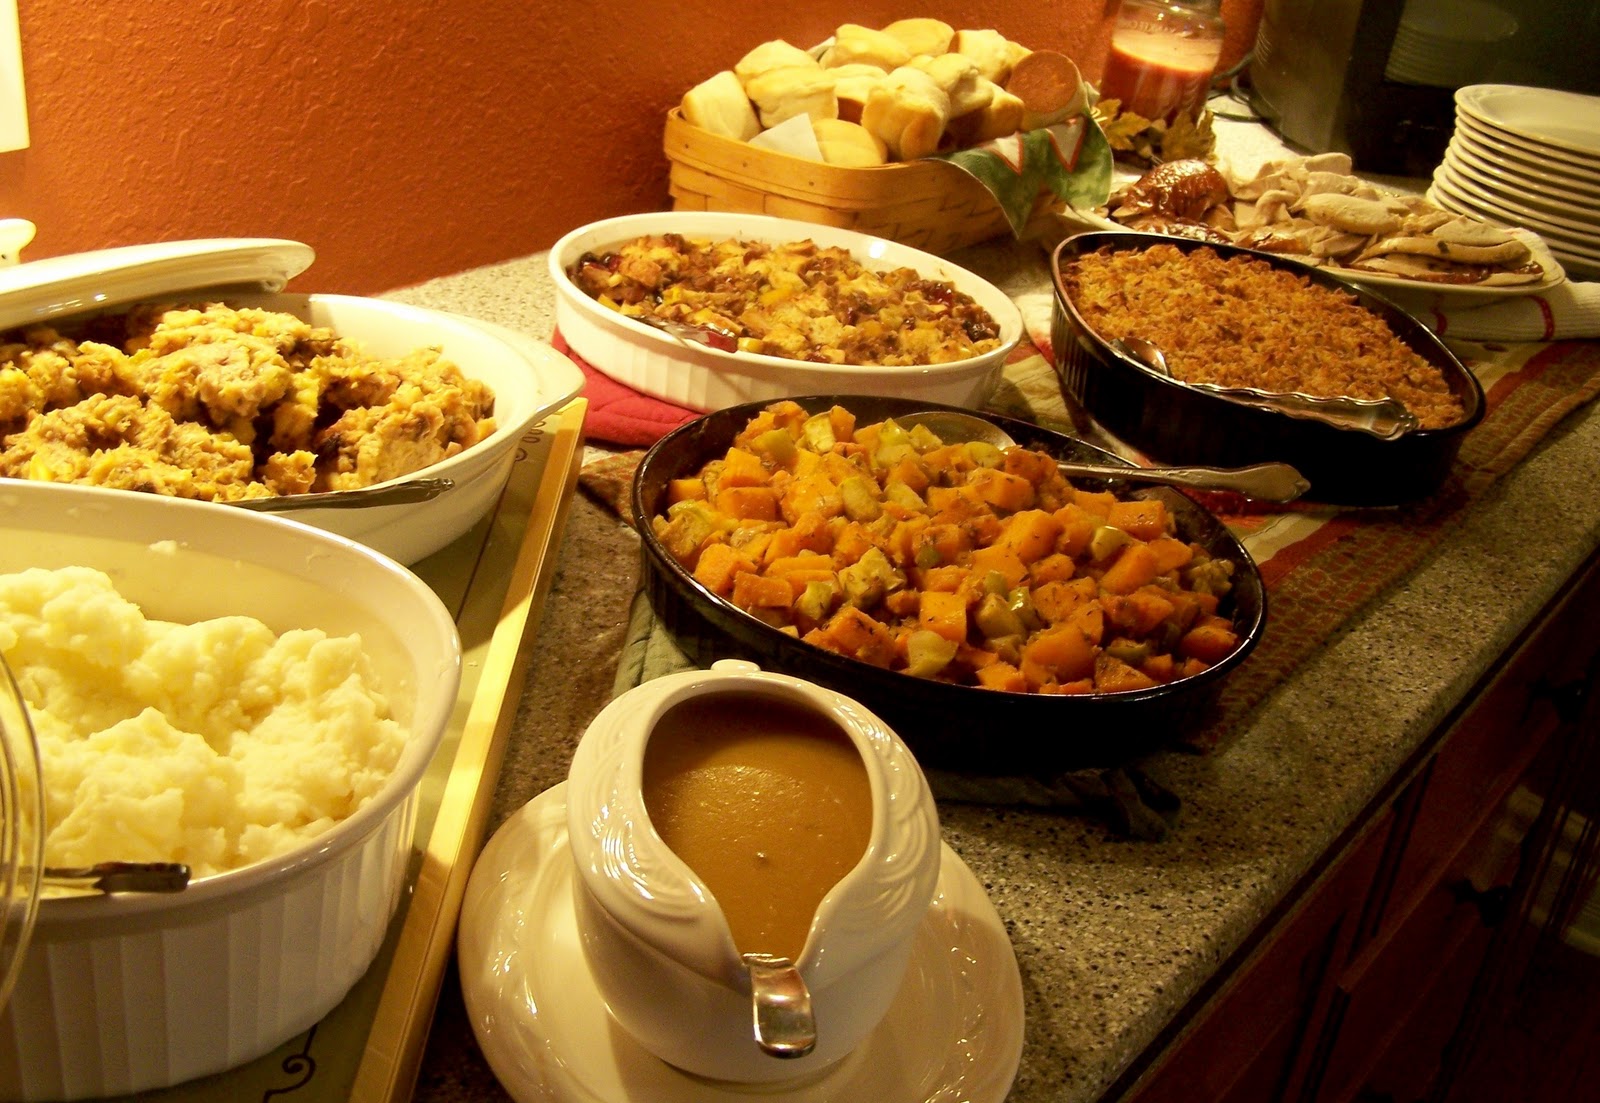 A Thanksgiving Buffet Serve The Family Meal The Easy Way! RedGage